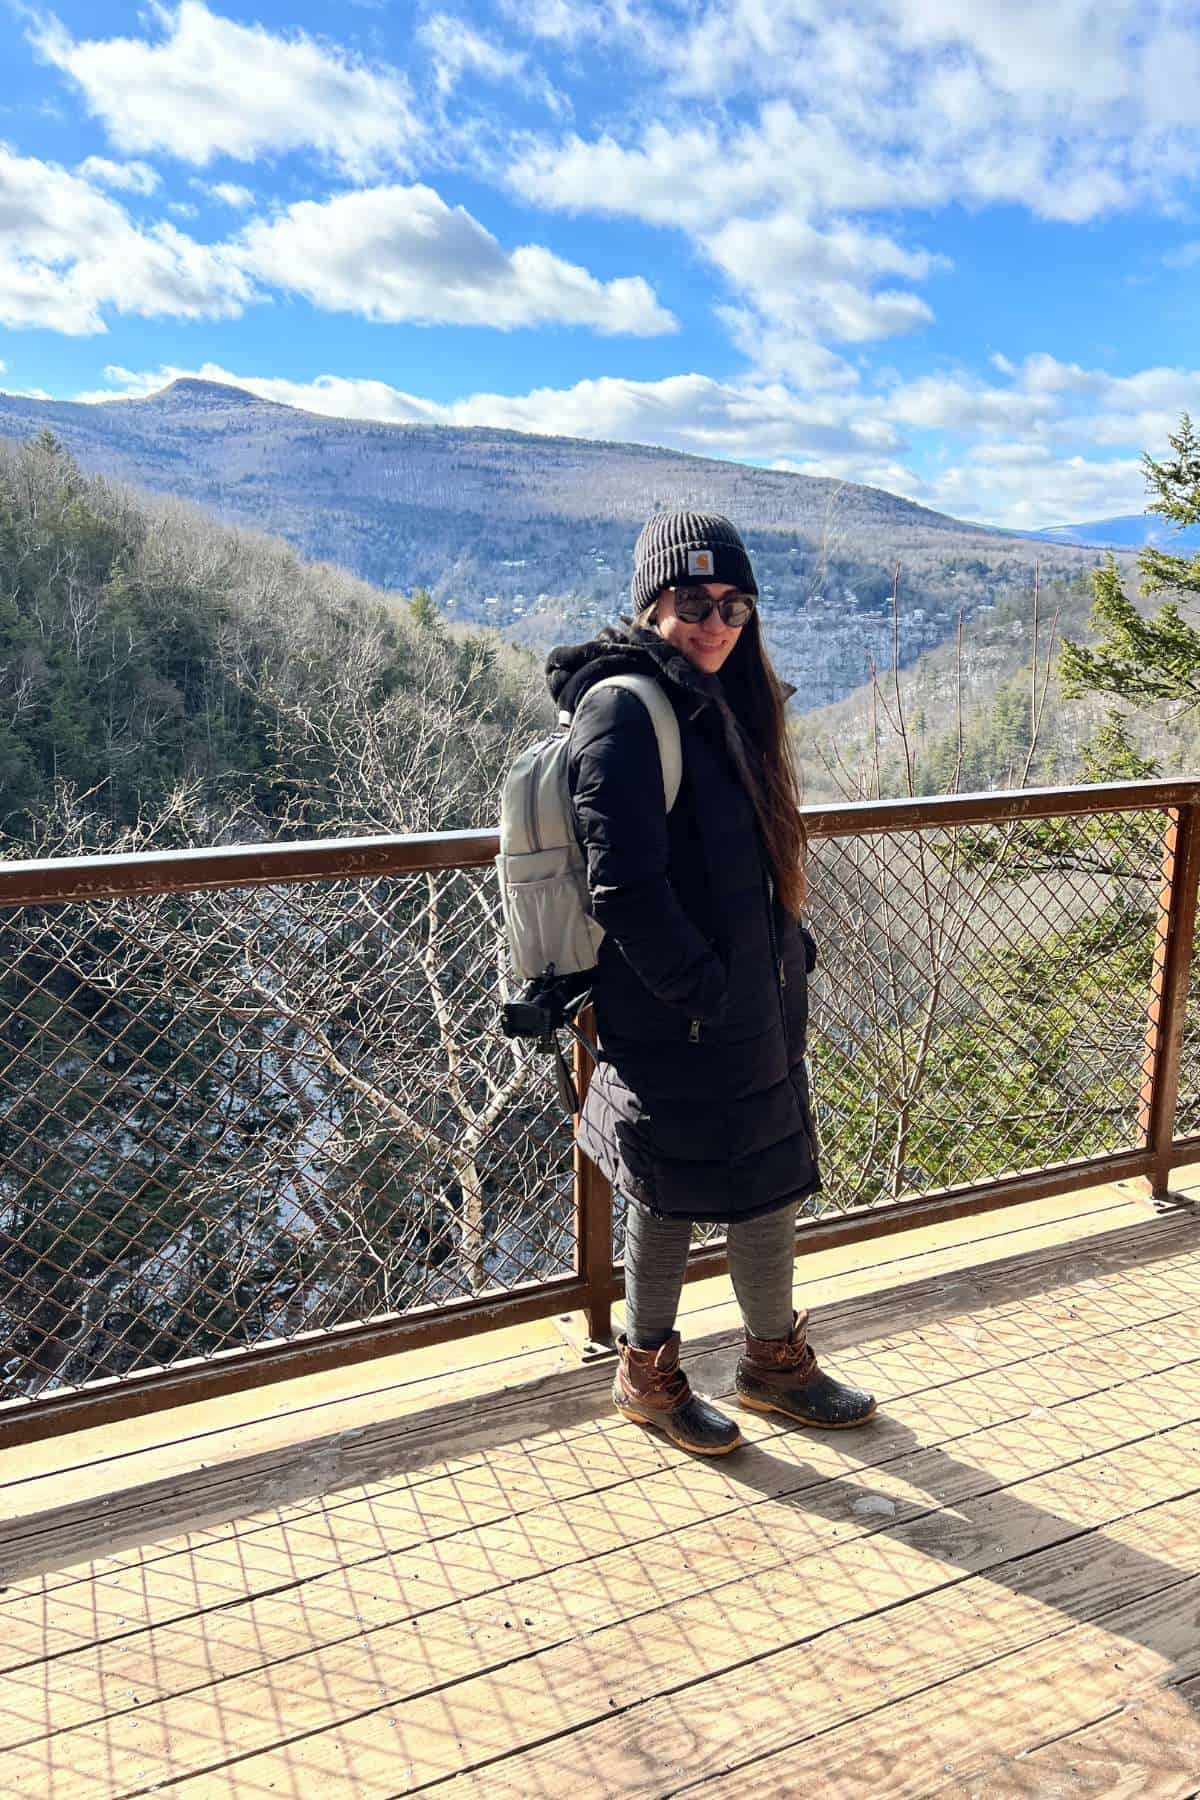 Posing on the viewing platform with Catskill Mountains in the background.